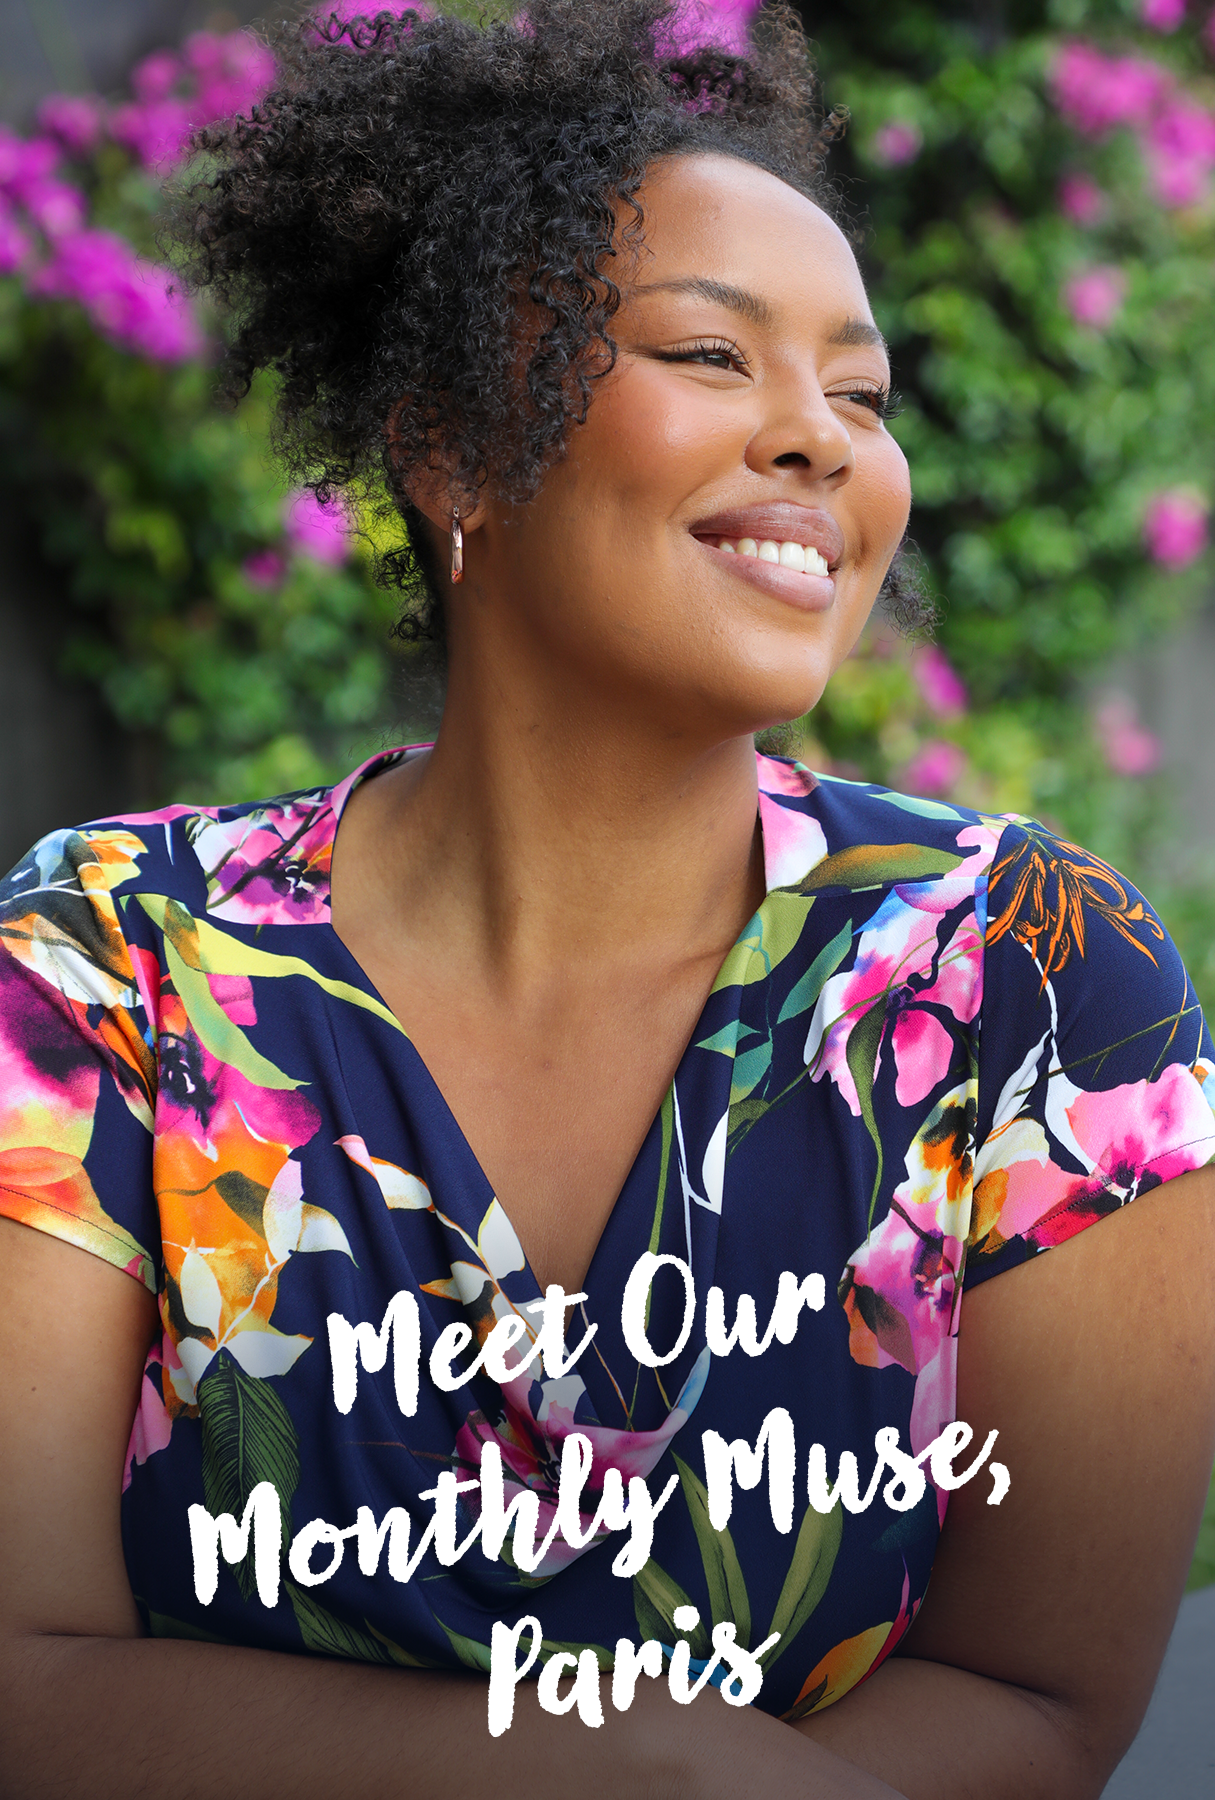 Australia fashion brand, Leina & Fleur show their monthly model muse, Paris. Paris is a plus size, size 18 woman wearing a floral print cowl neck top, one of the new spring summer fashion trends for 2023. 